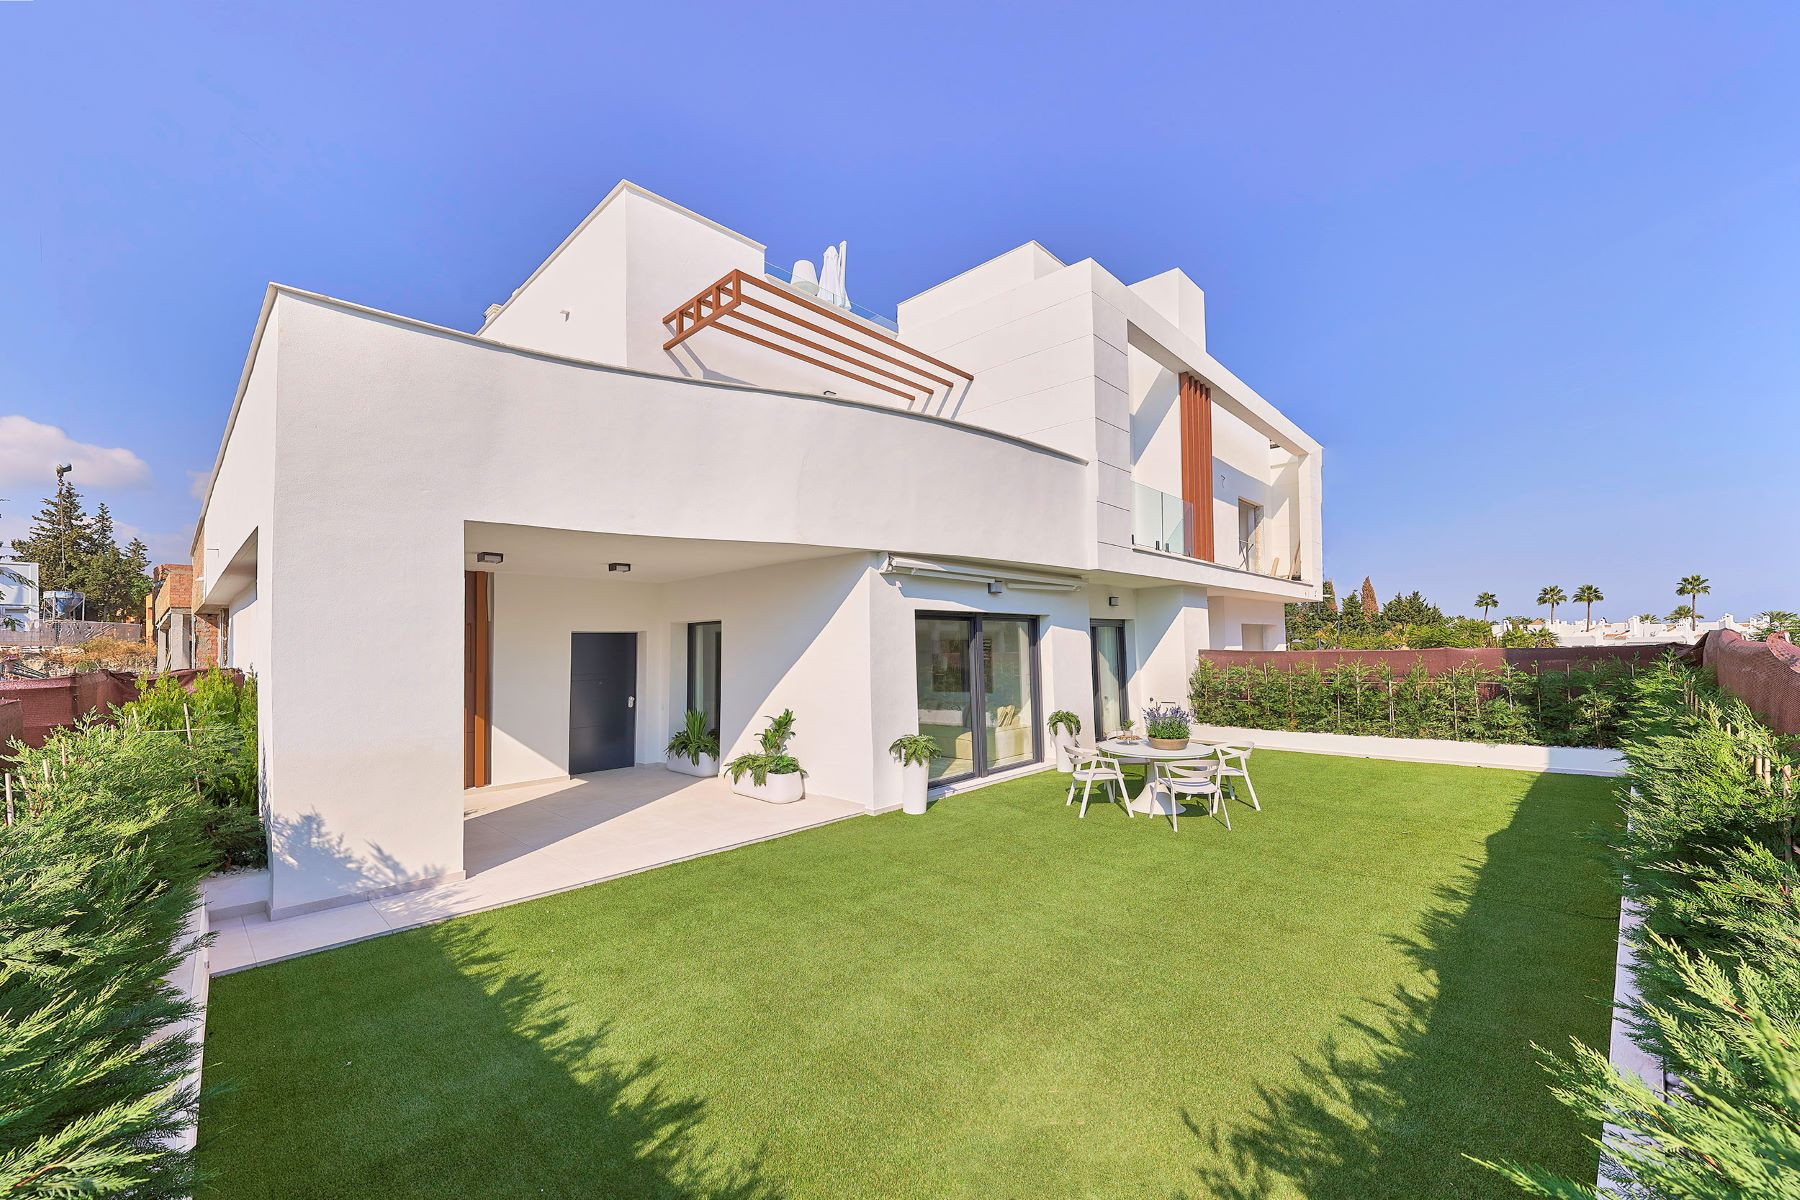 New development of contemporary townhouses in Cancelada - New Golden Mile